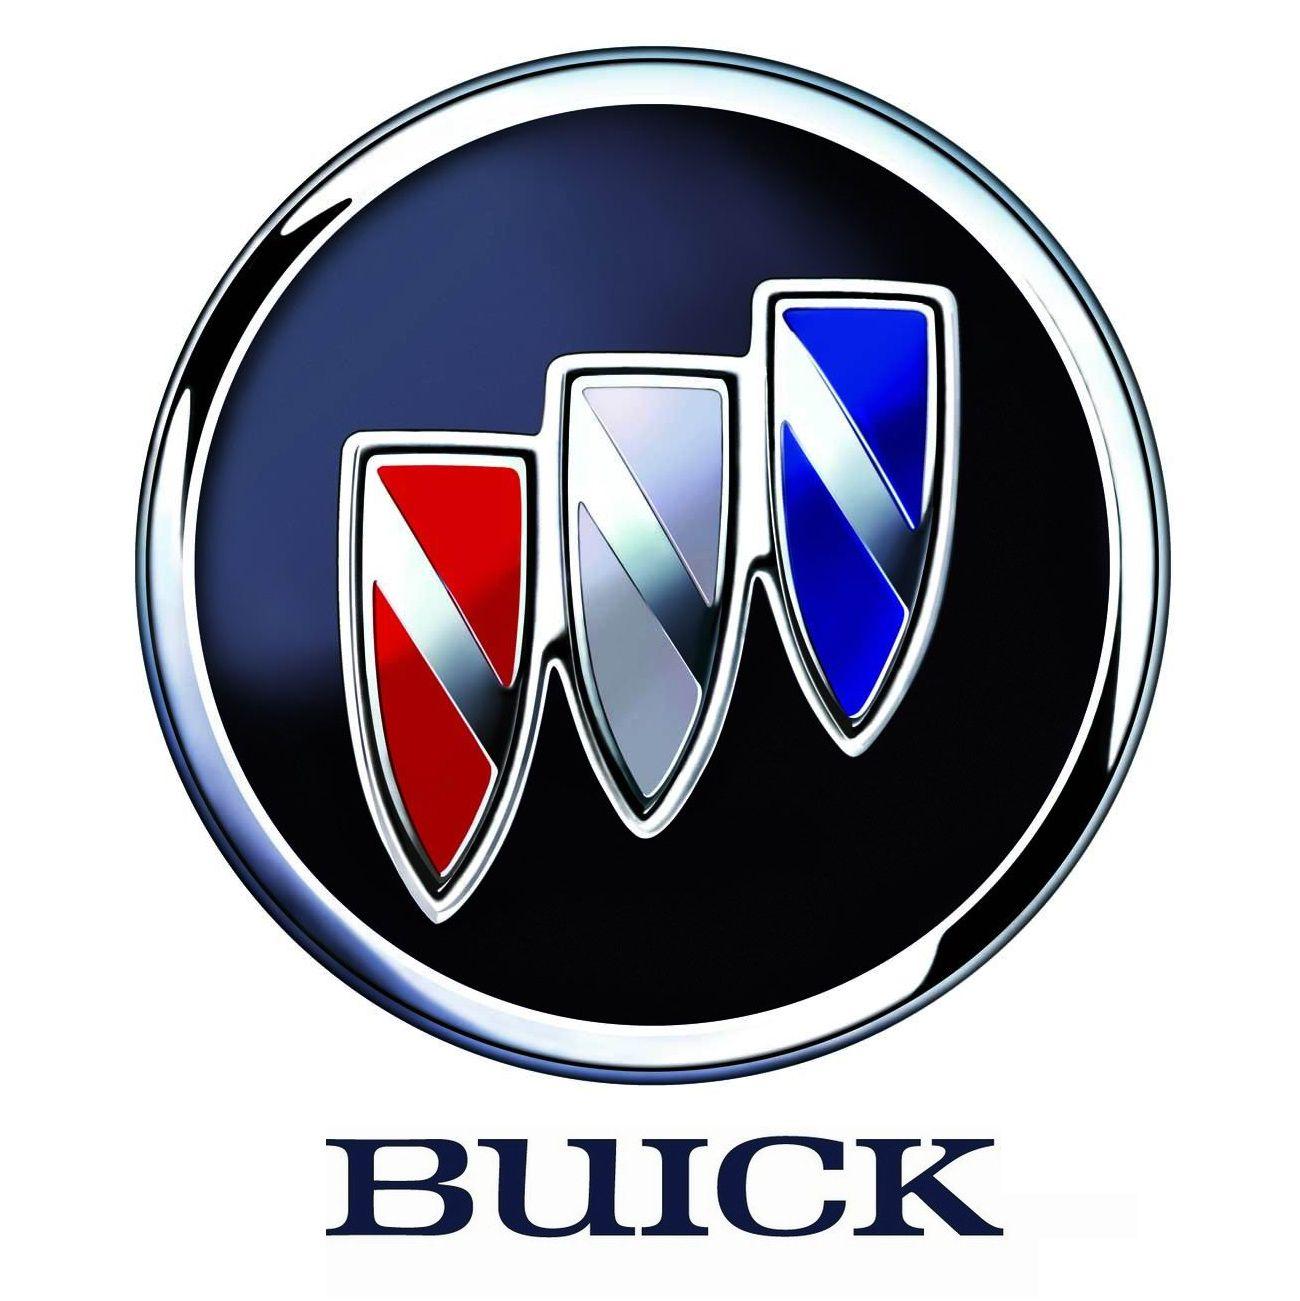 Red White Shield Auto Logo - Buick Logo, Buick Car Symbol Meaning and History | Car Brand Names.com